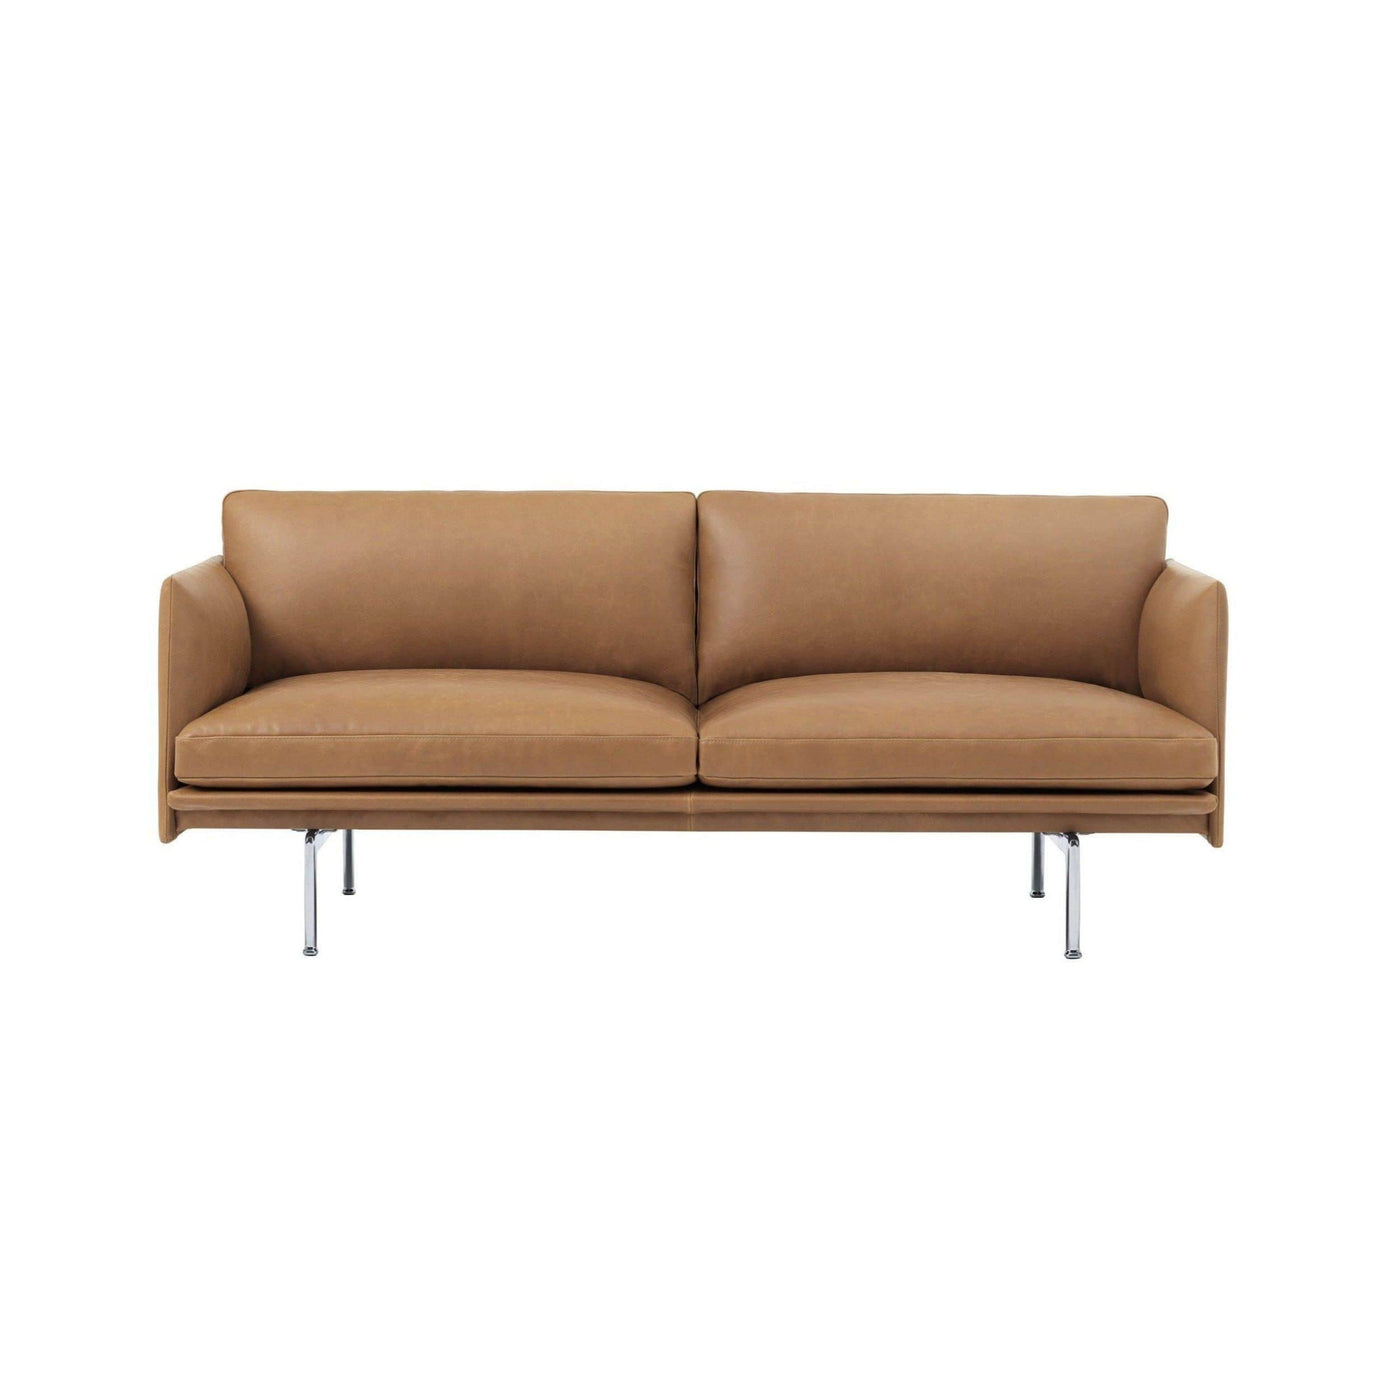 Muuto Outline 2 seater sofa in cognac refine leather with polished aluminium legs. Available from someday designs. #colour_cognac-refine-leather